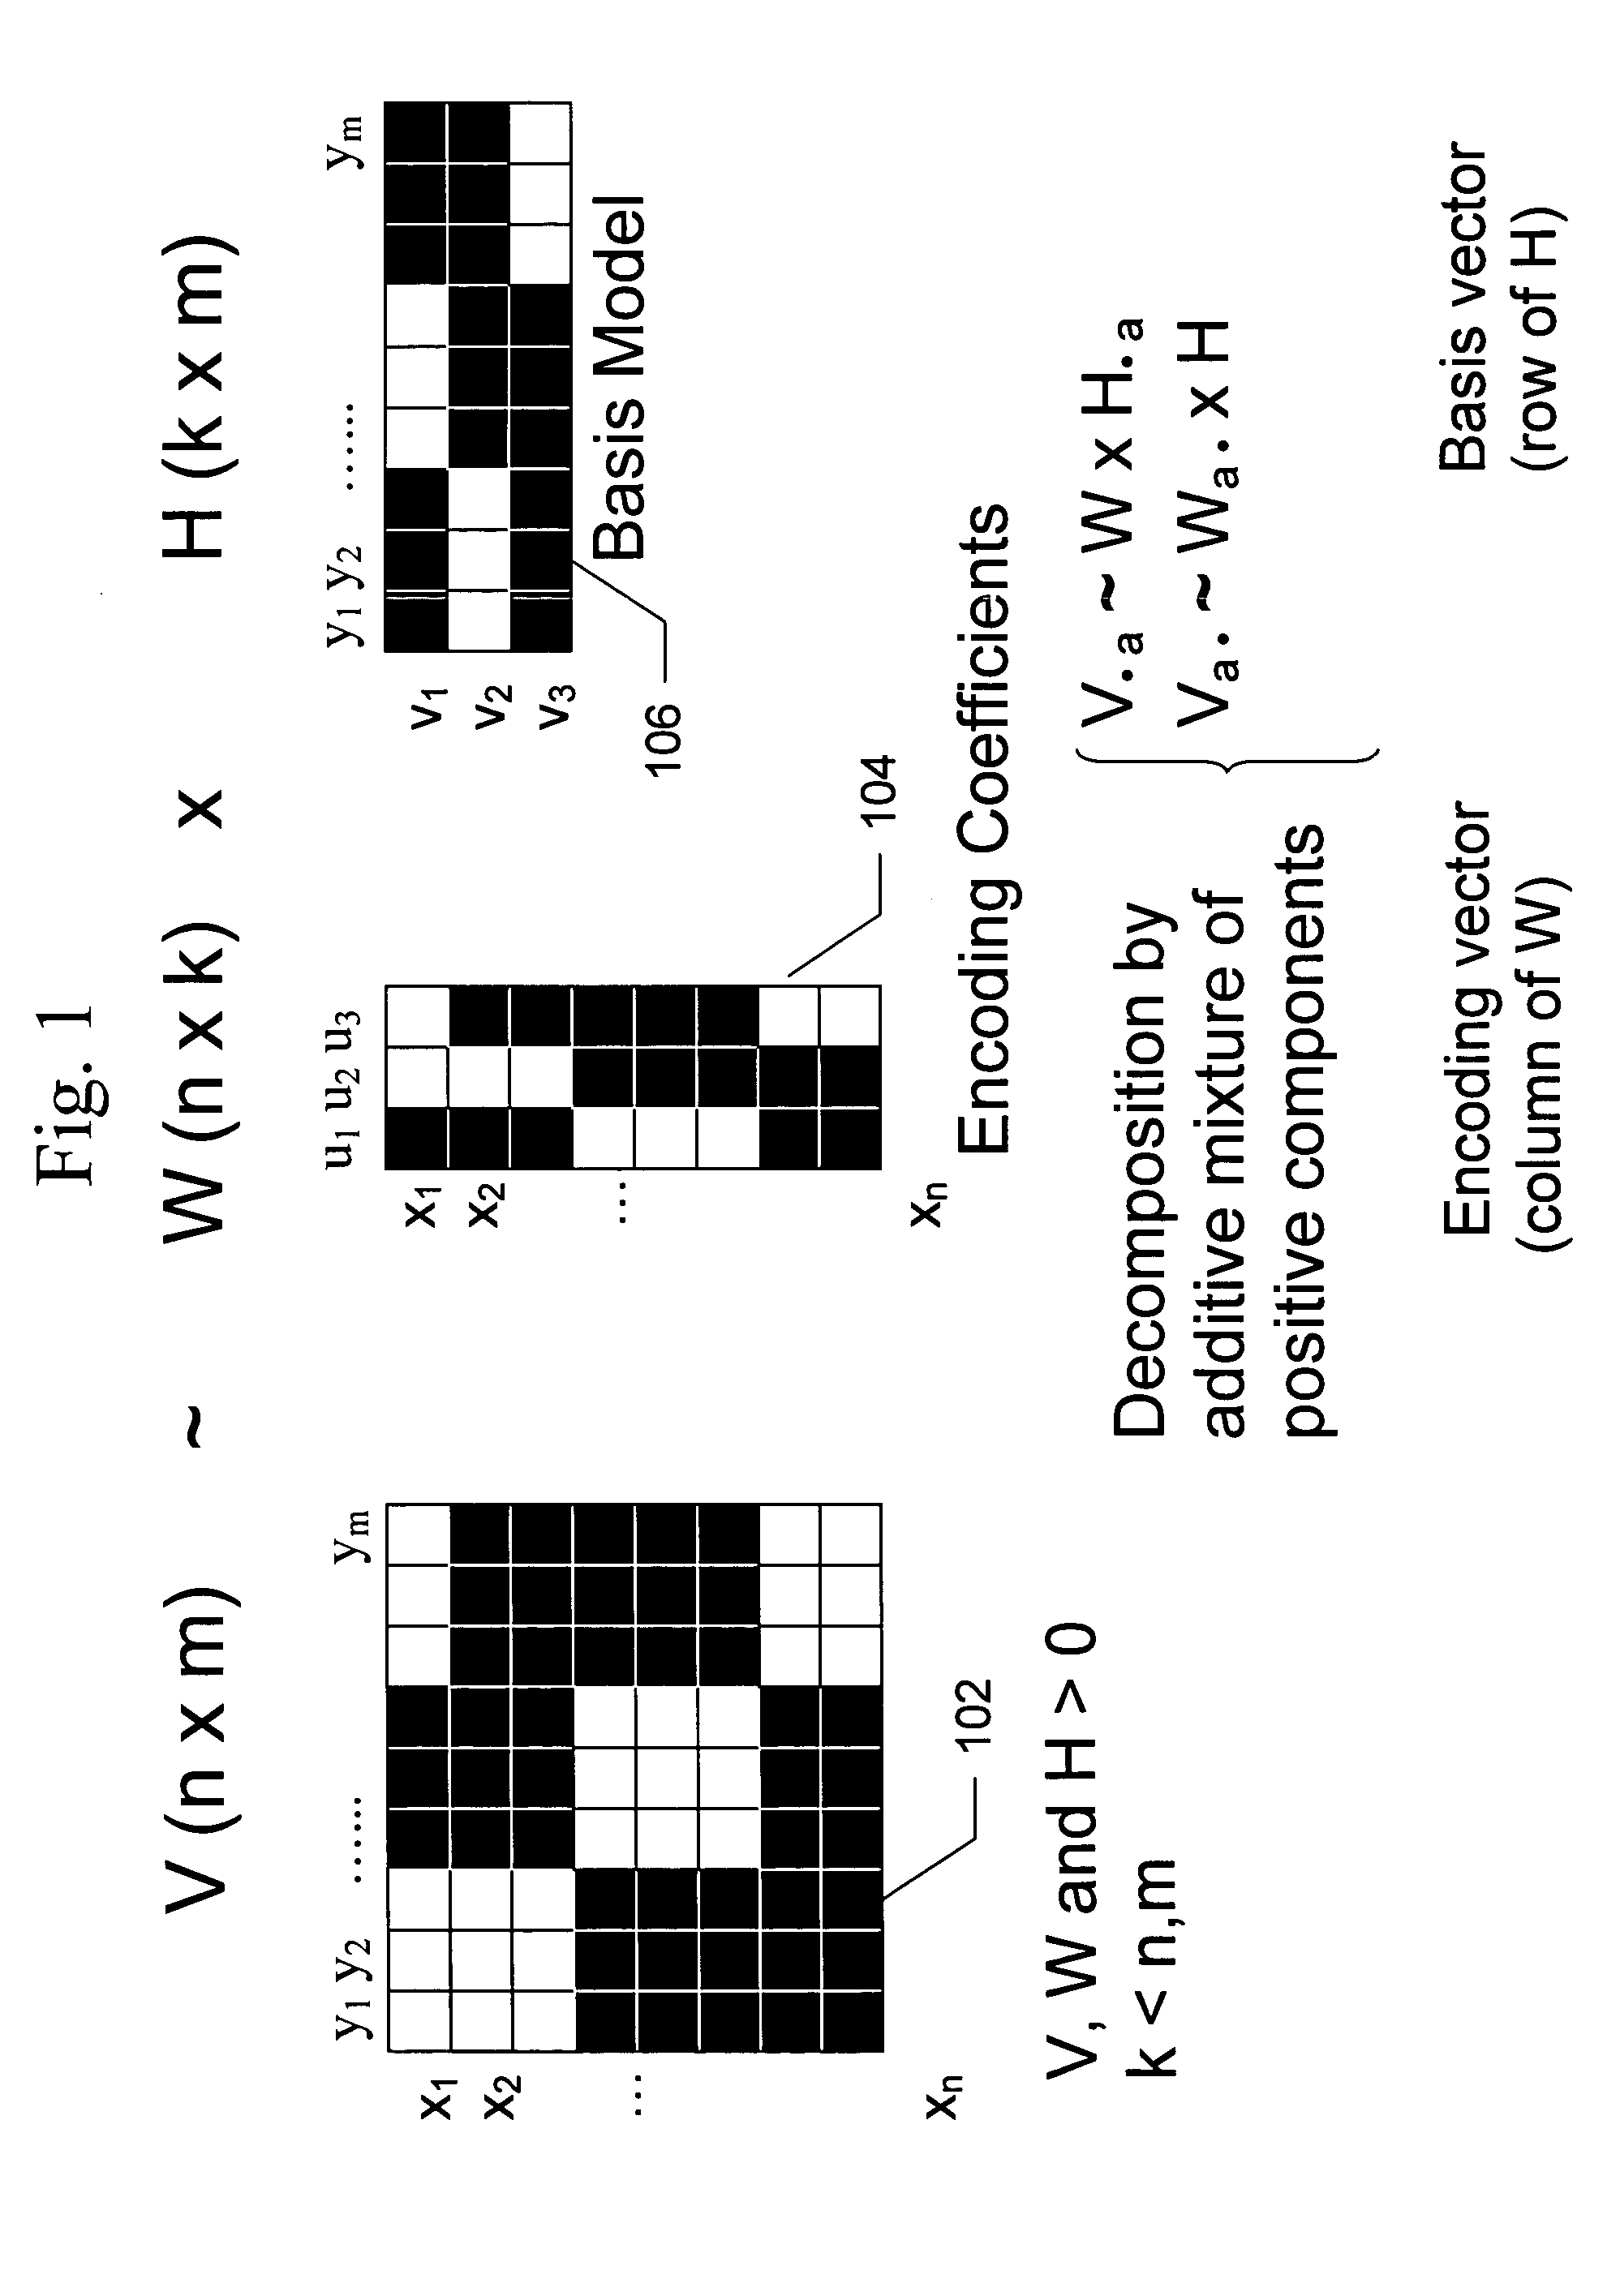 Non-negative matrix factorization from the data in the multi-dimensional data table using the specification and to store metadata representing the built relational database management system